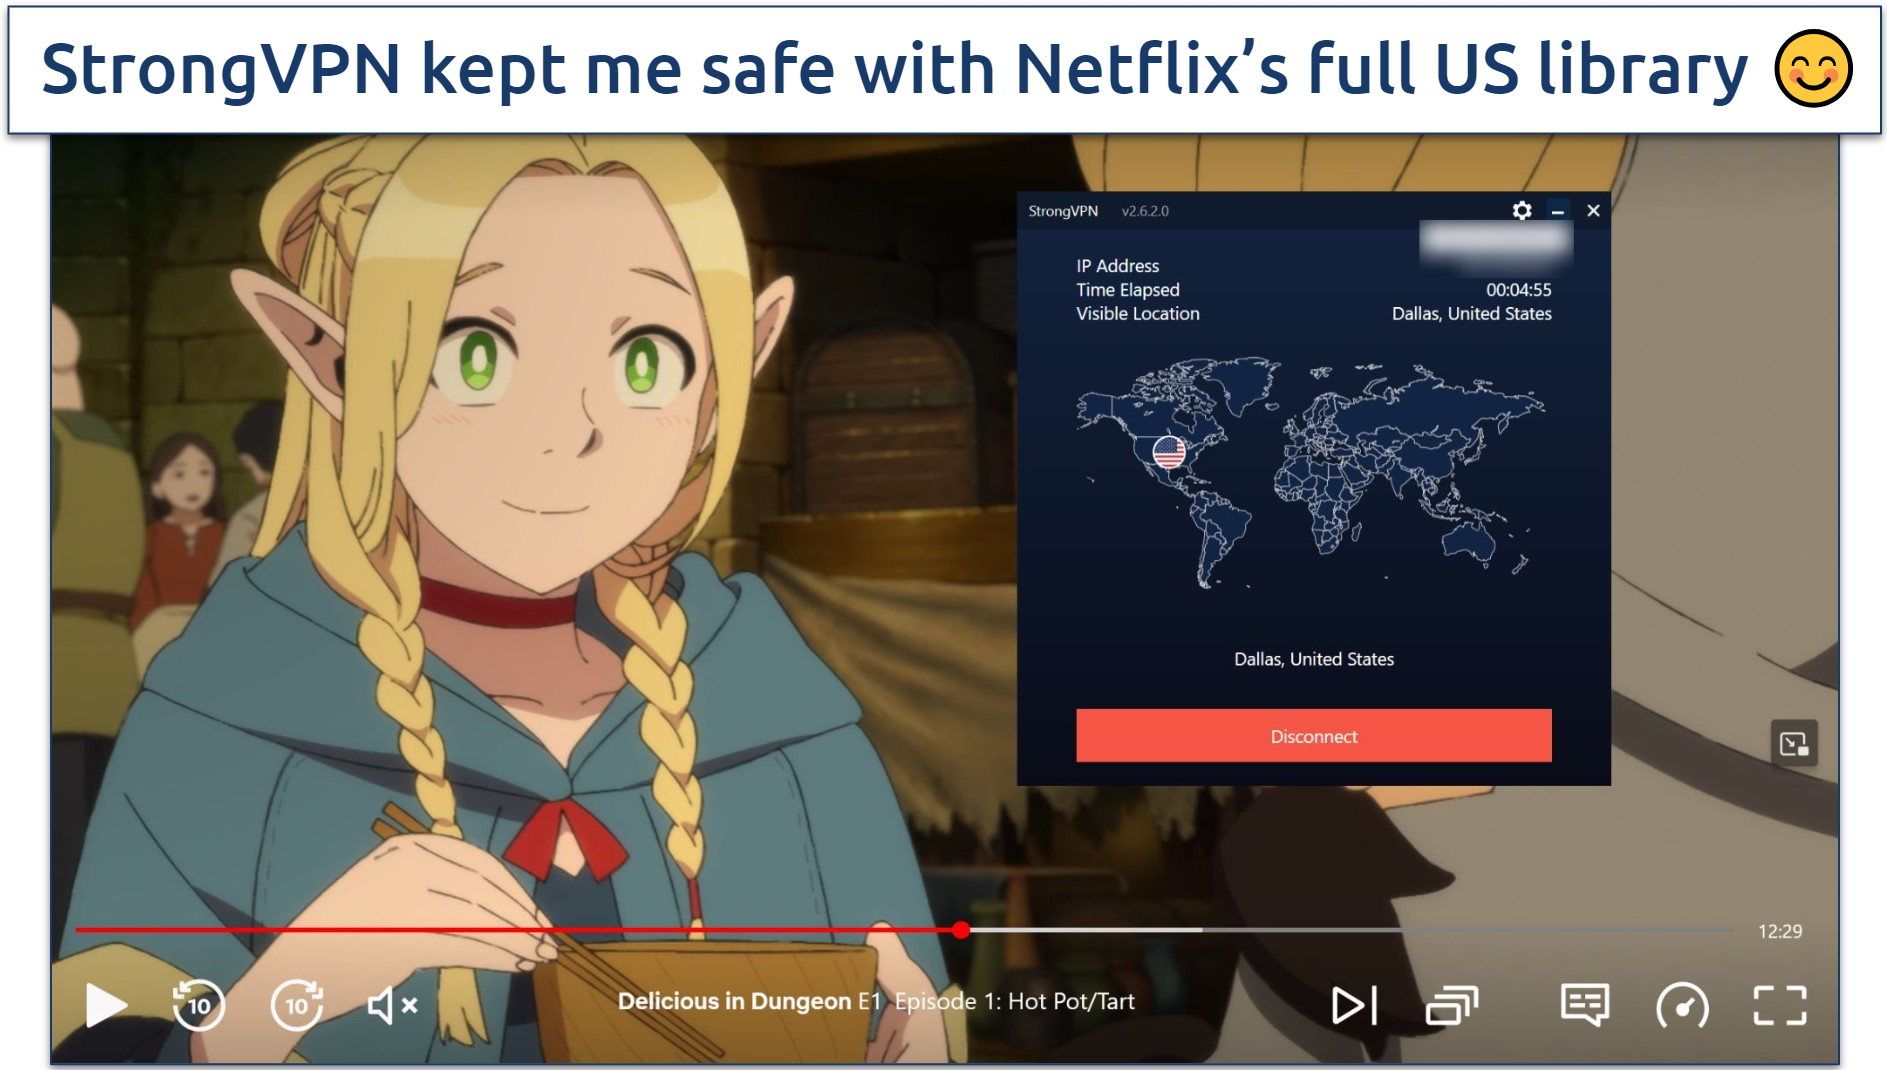 Screenshot of Netflix player streaming Delicious in Dungeon while connected to StrongVPN's Dallas server